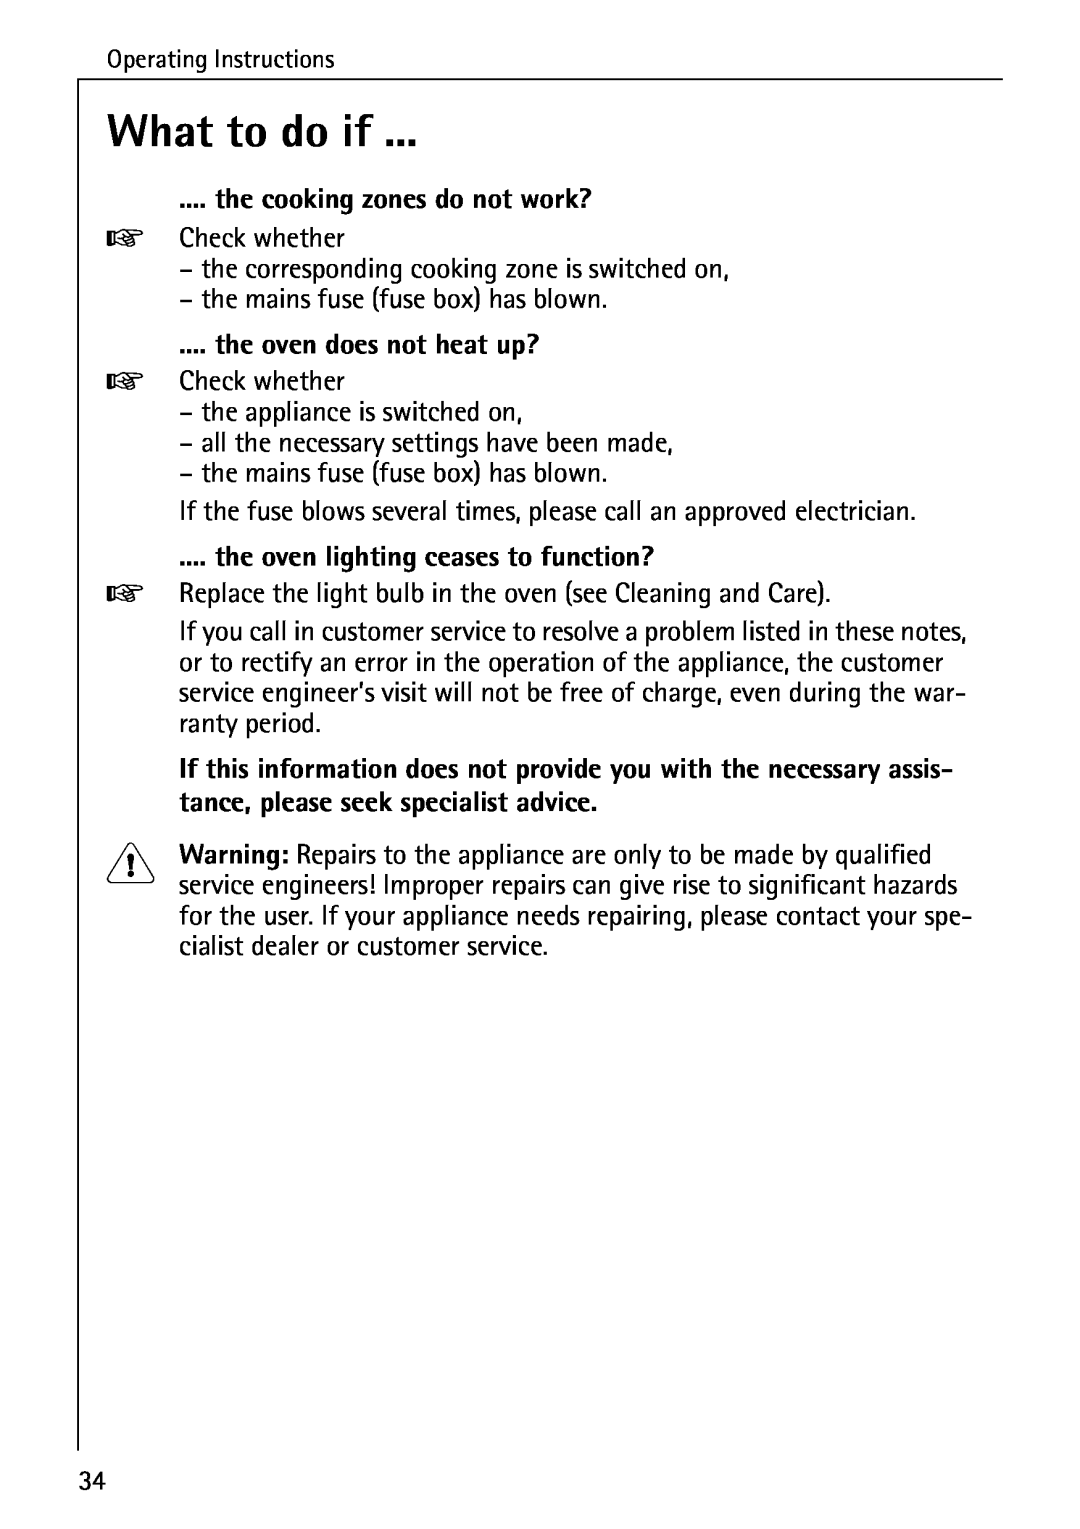 AEG 2003 F operating instructions What to do if, the cooking zones do not work?, the oven does not heat up? 